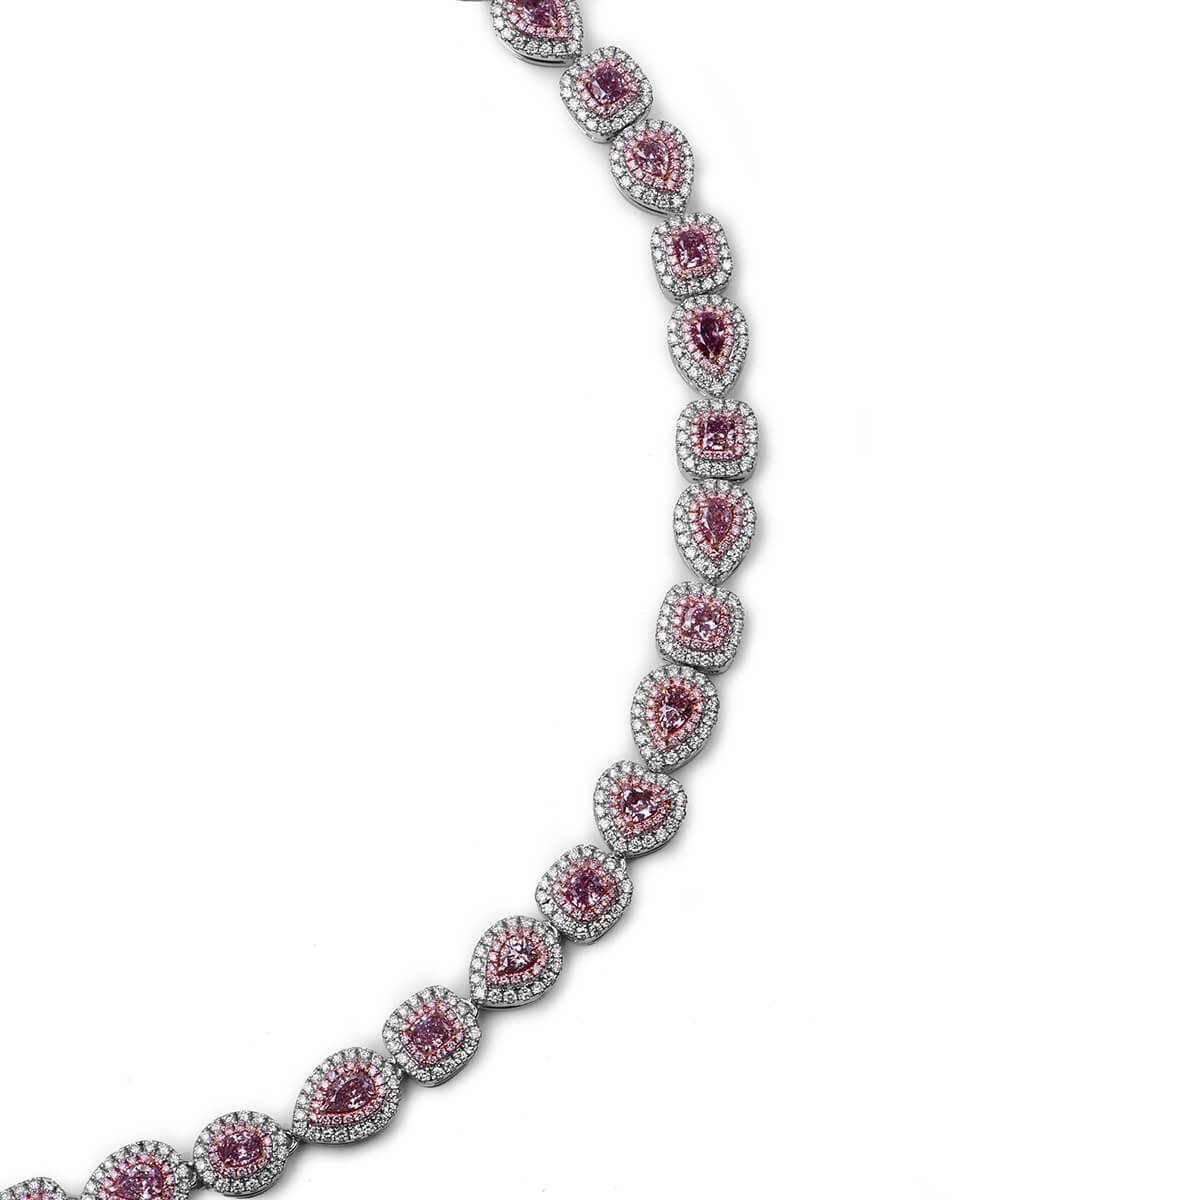 Fancy Orangy Pink Diamond Necklace, 14.29 Ct. TW, Pear shape, GIA Certified, JCNF05383077